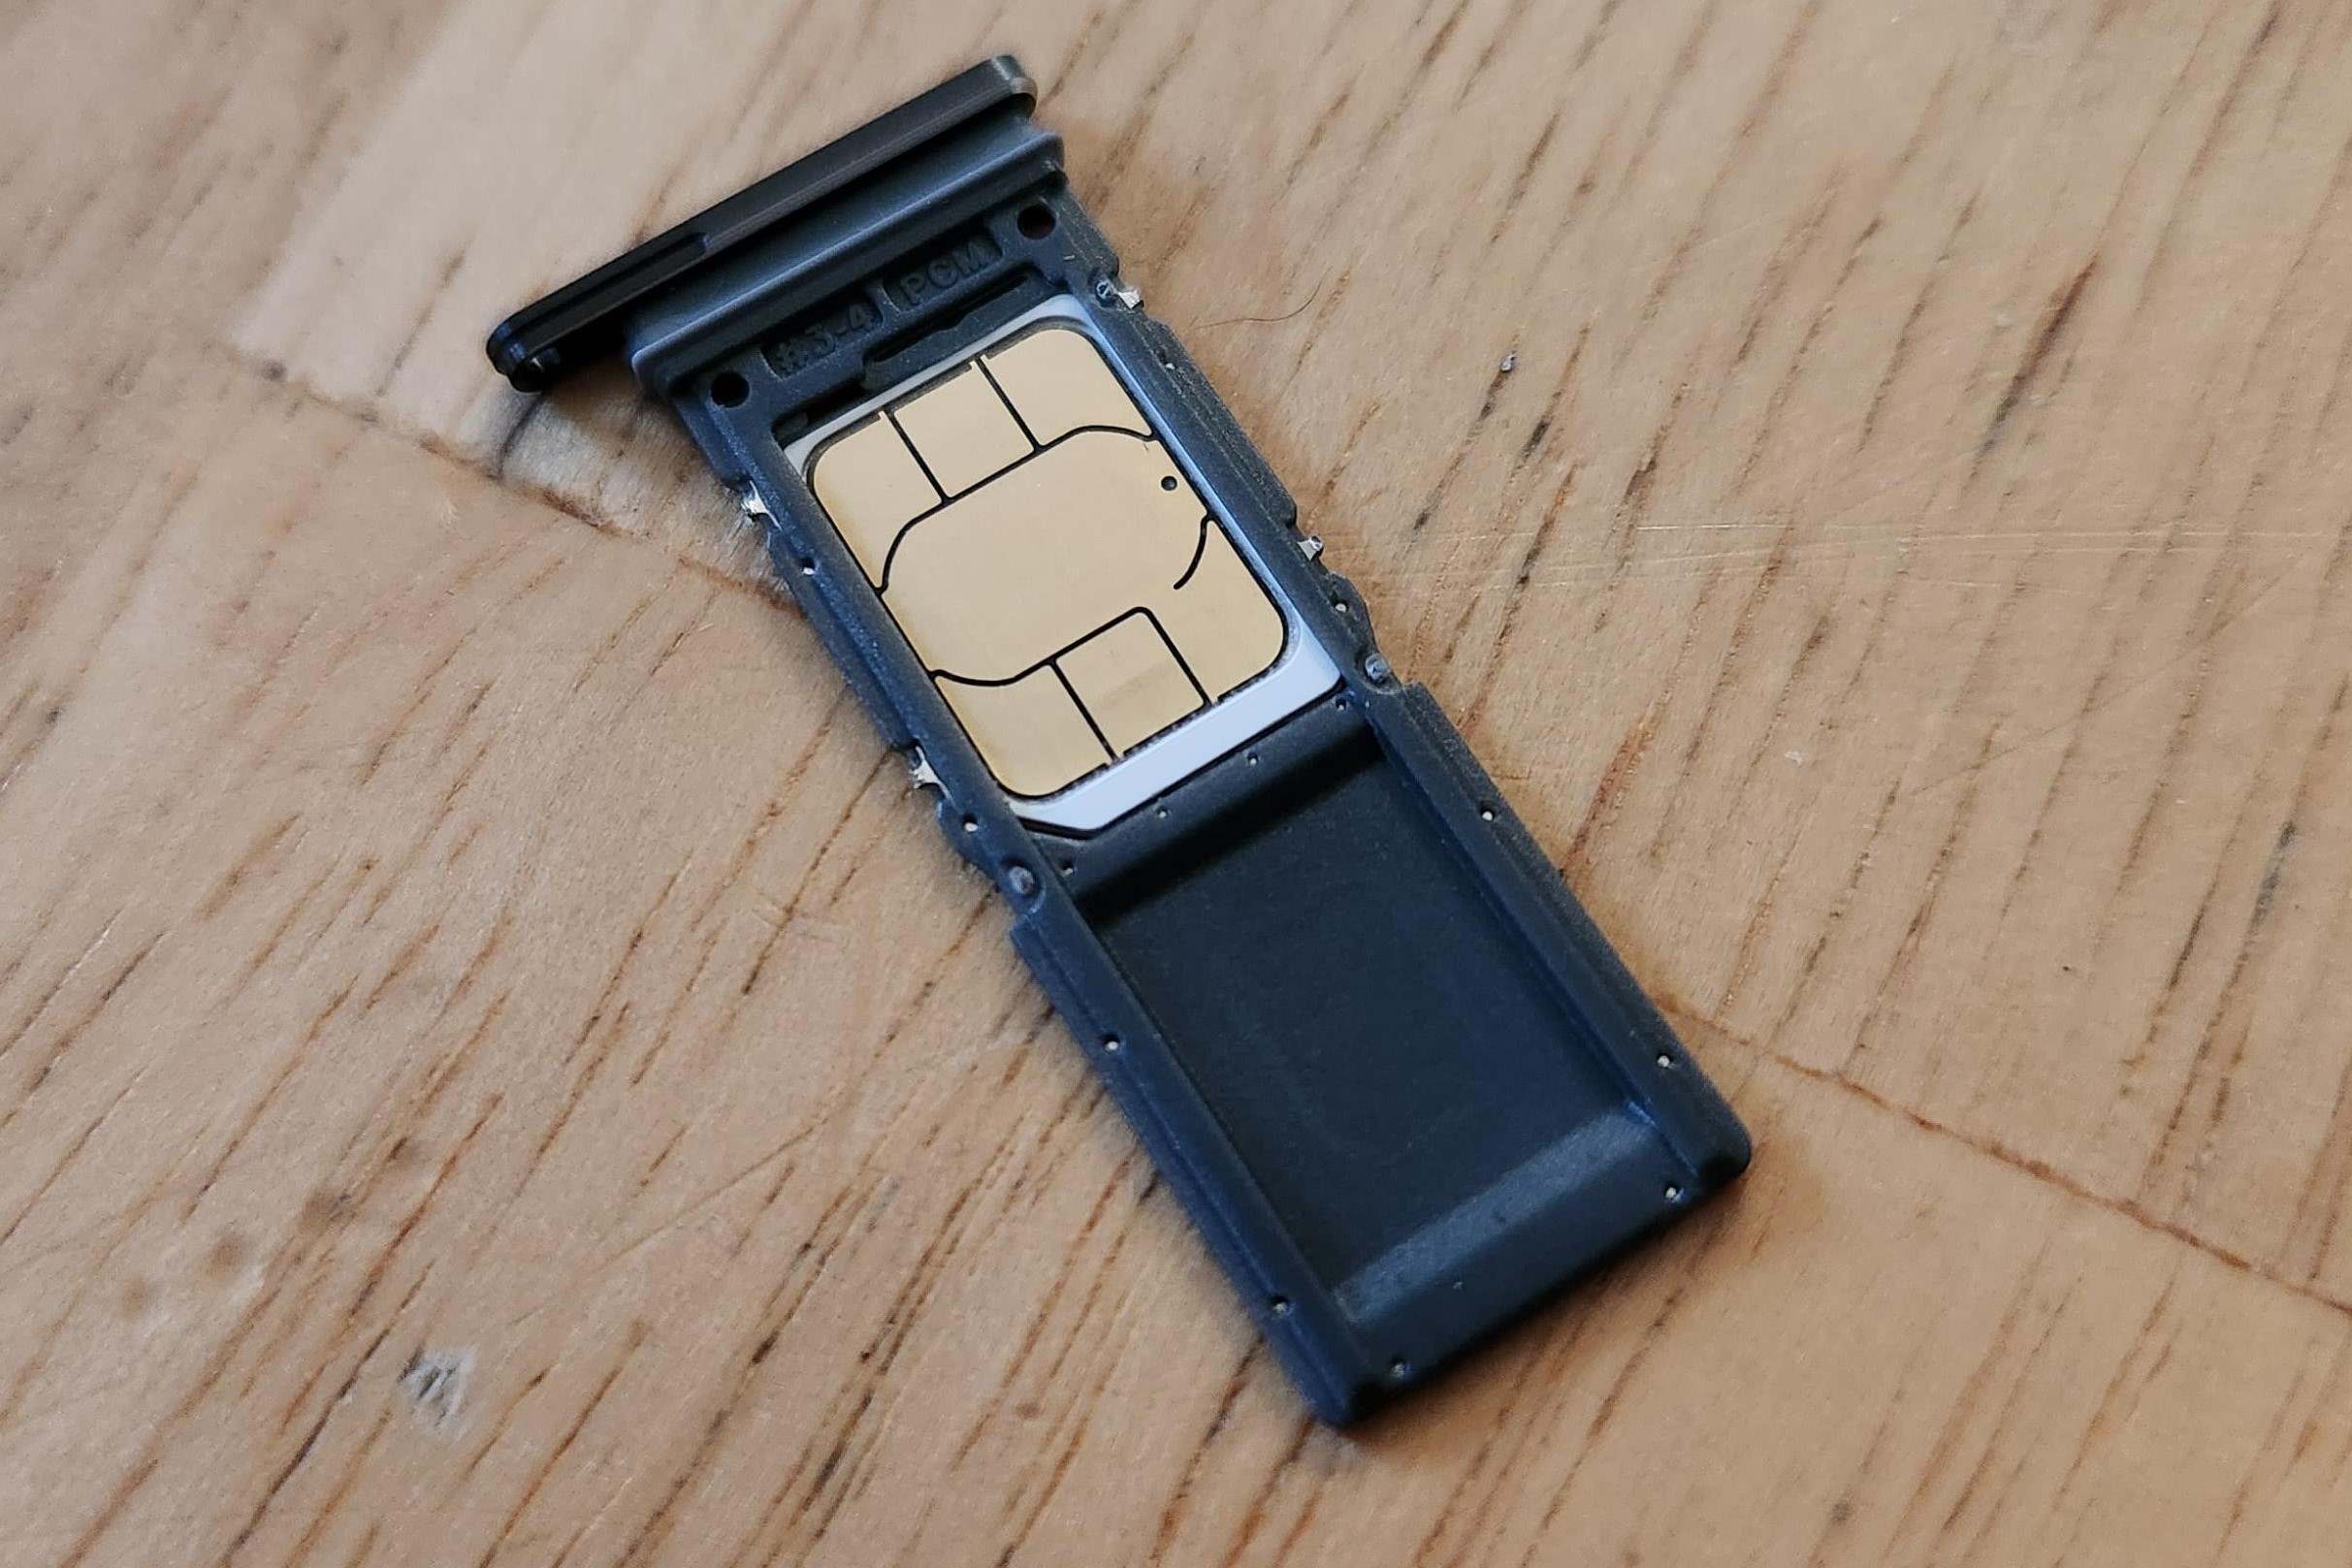 Opening The SIM Card Slot On A Phone: Essential Steps